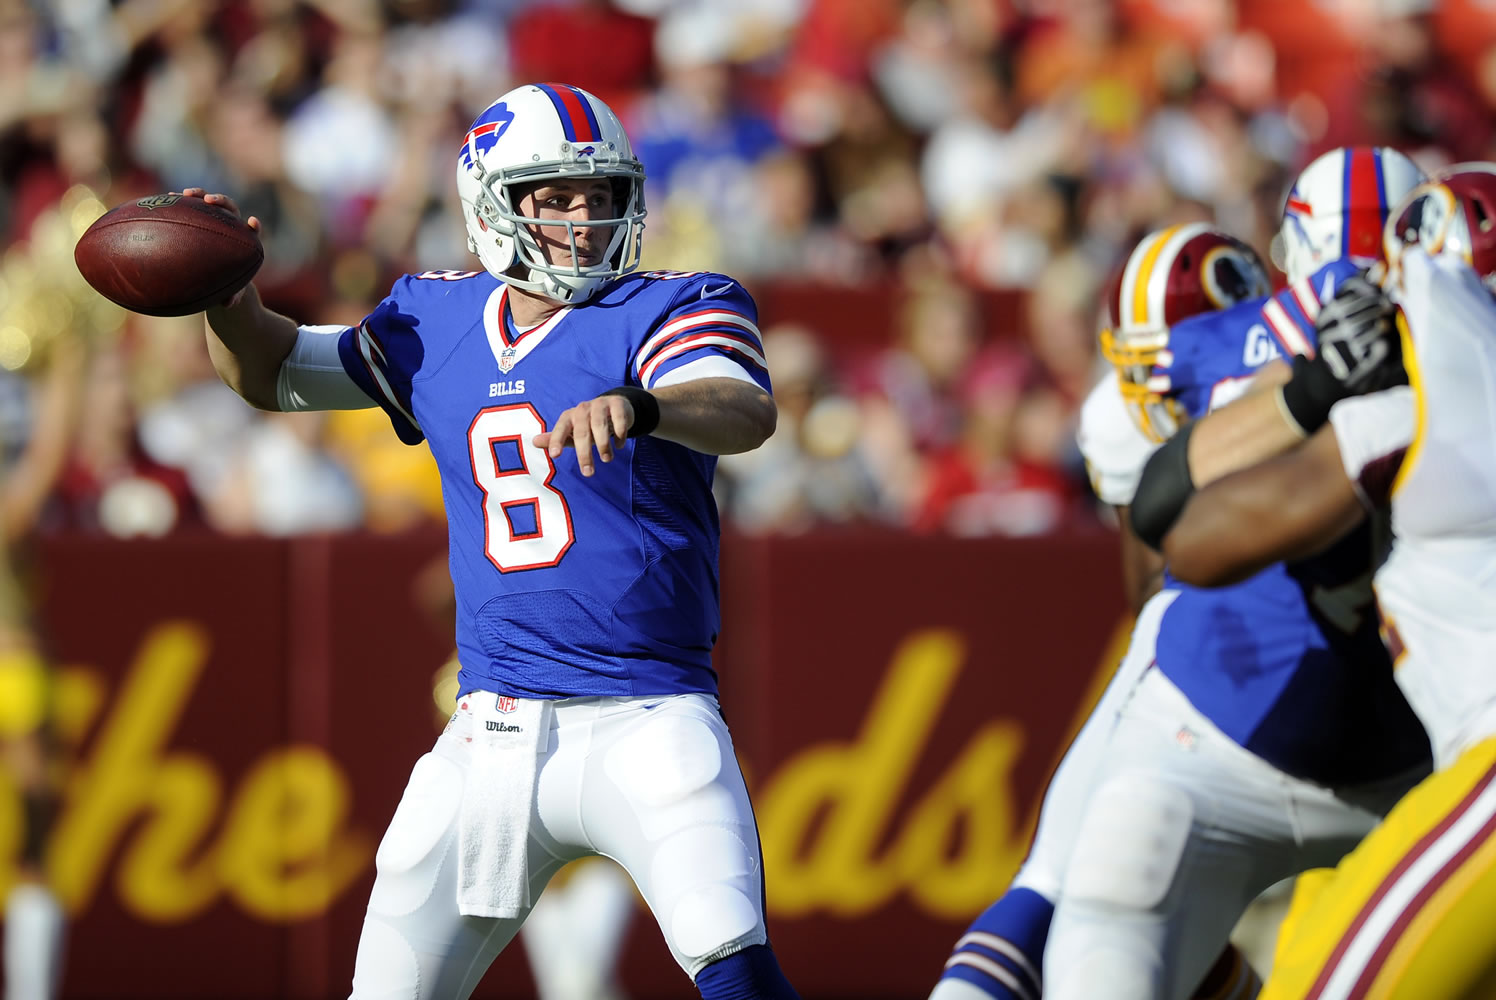 Jeff Tuel, an undrafted rookie who played at Washington State, has been named Buffalo's starting quarterback for the season opener.